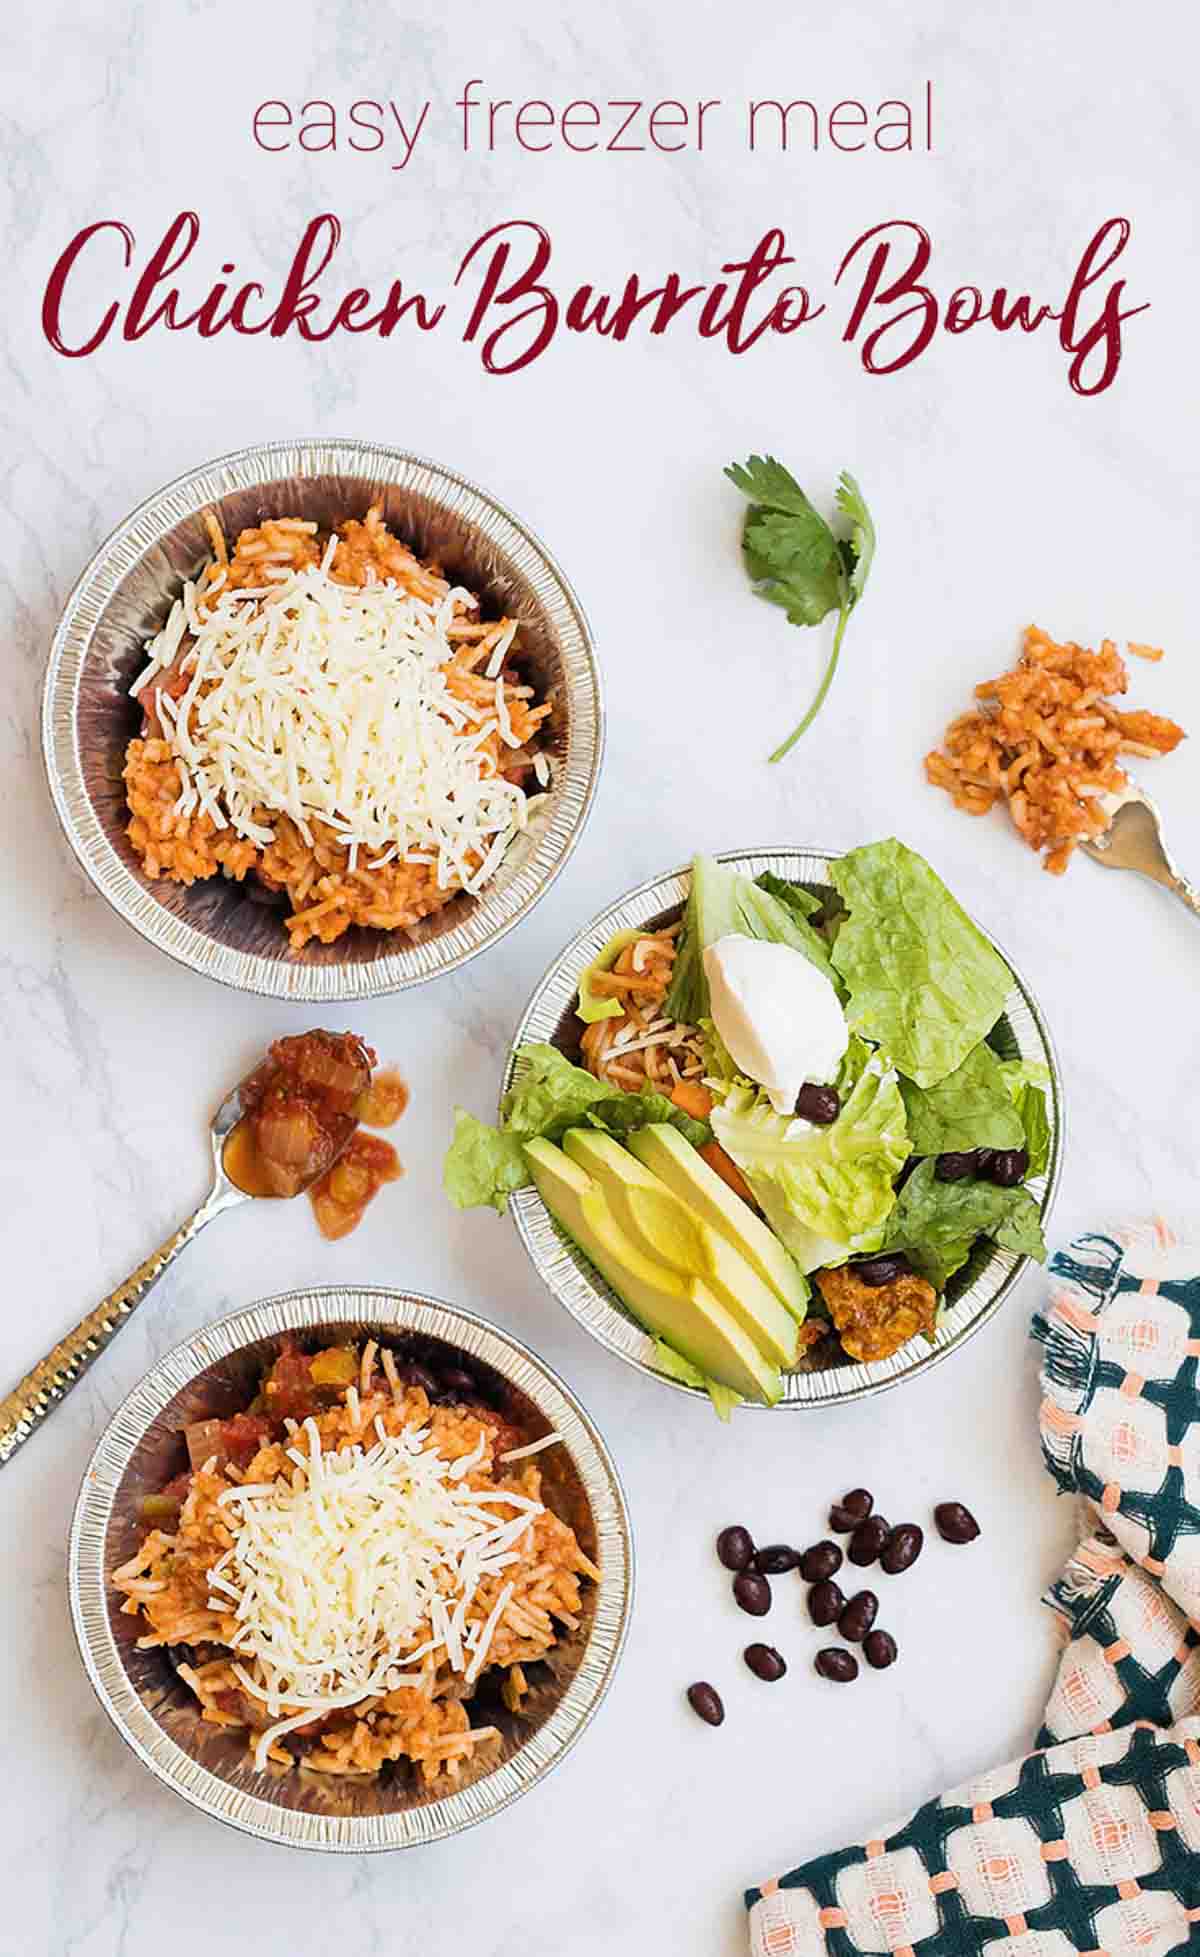 3 chicken burrito bowls with red spanish rice, lettuce and avocado